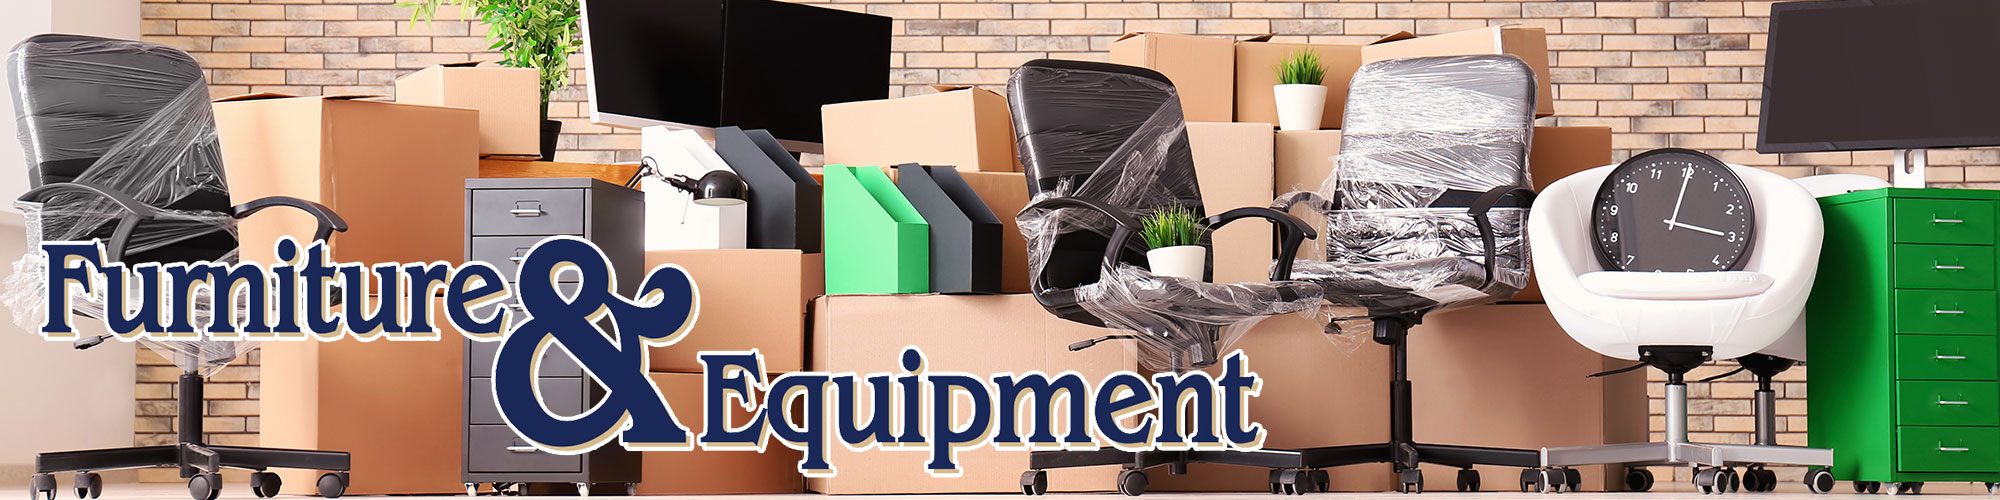 Furniture and Equipment